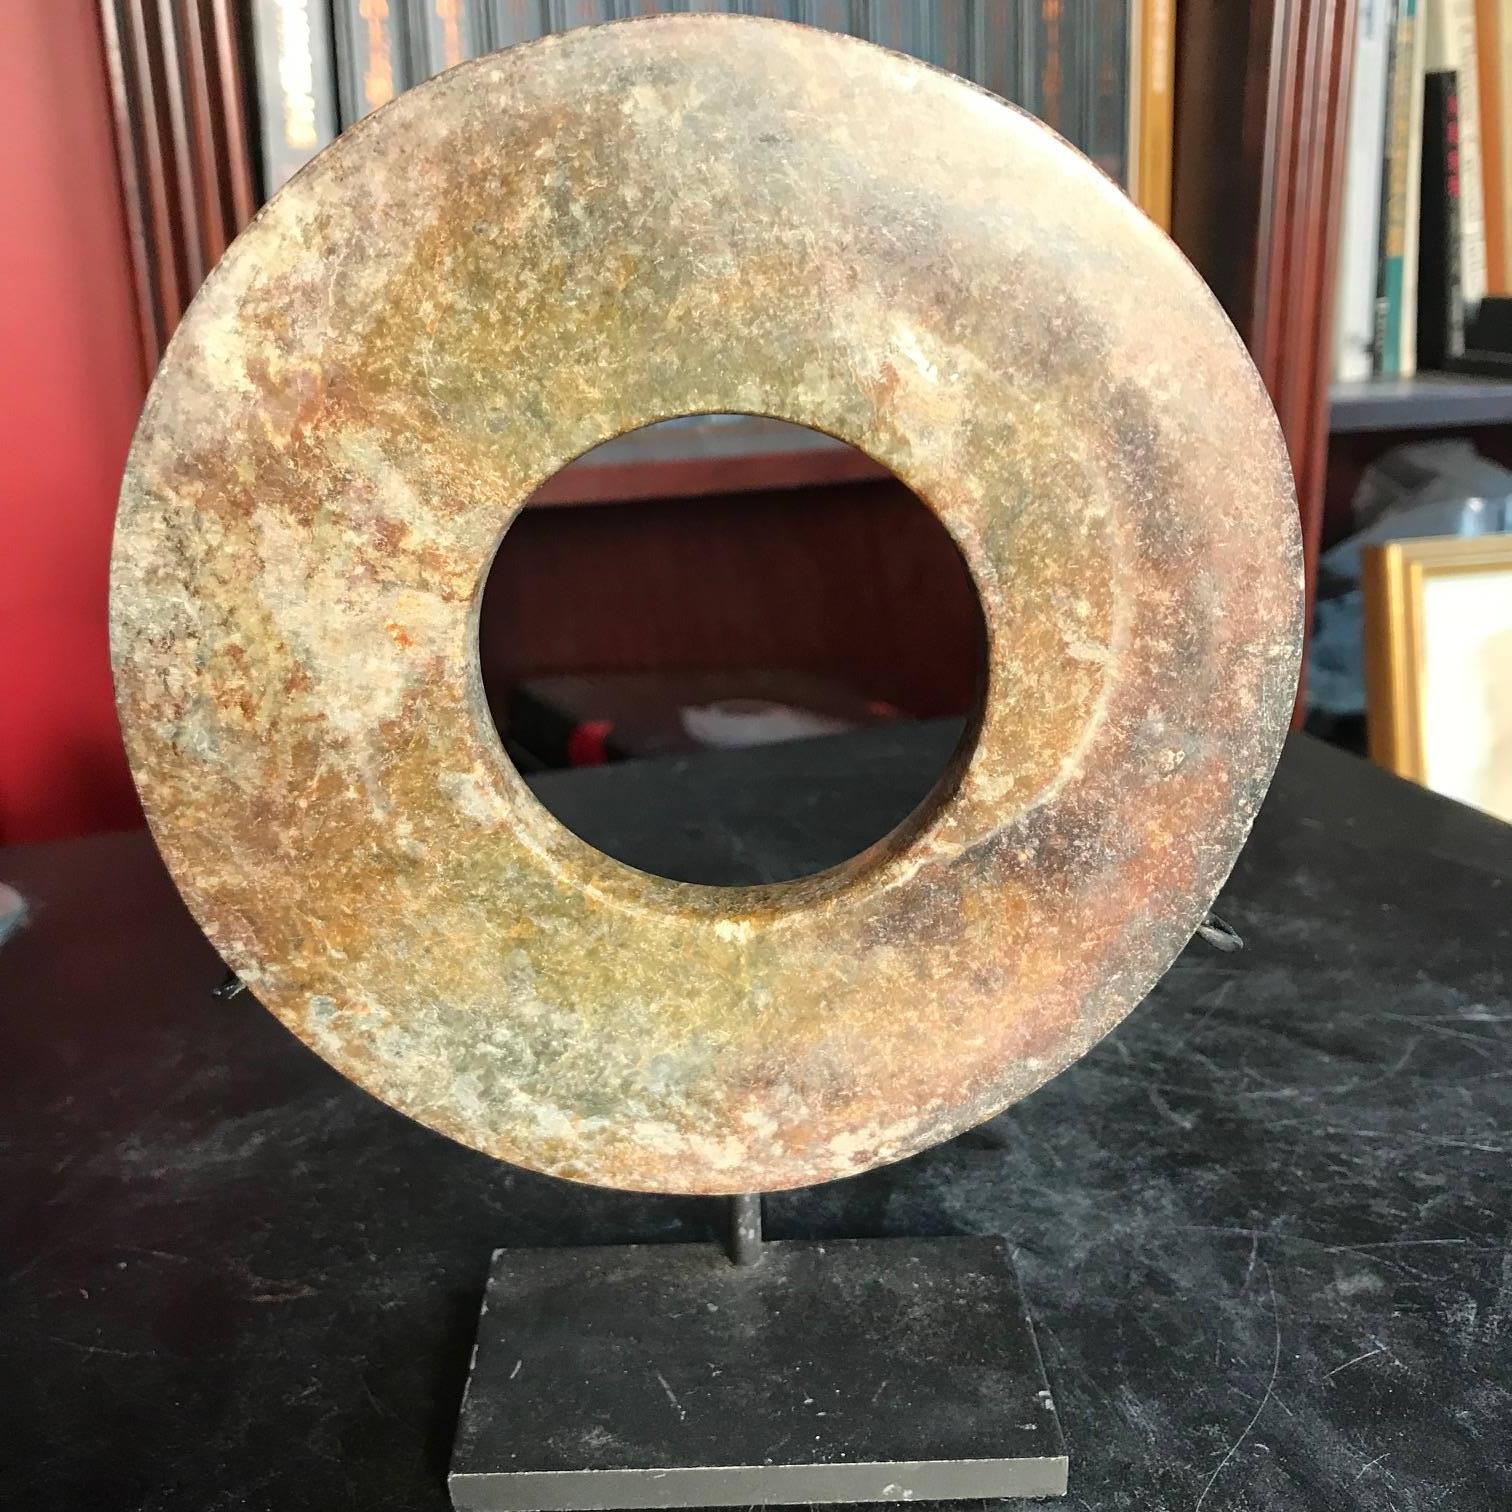 This is an authentic Chinese ancient jade bi disc from the Qi Jia Culture, Northwestern China, 3,000-2,000 BCE. This comes from our private collection. 

Including Our Certificate of Authenticity

Dimensions: the bi disc is 5.67 inches diameter and